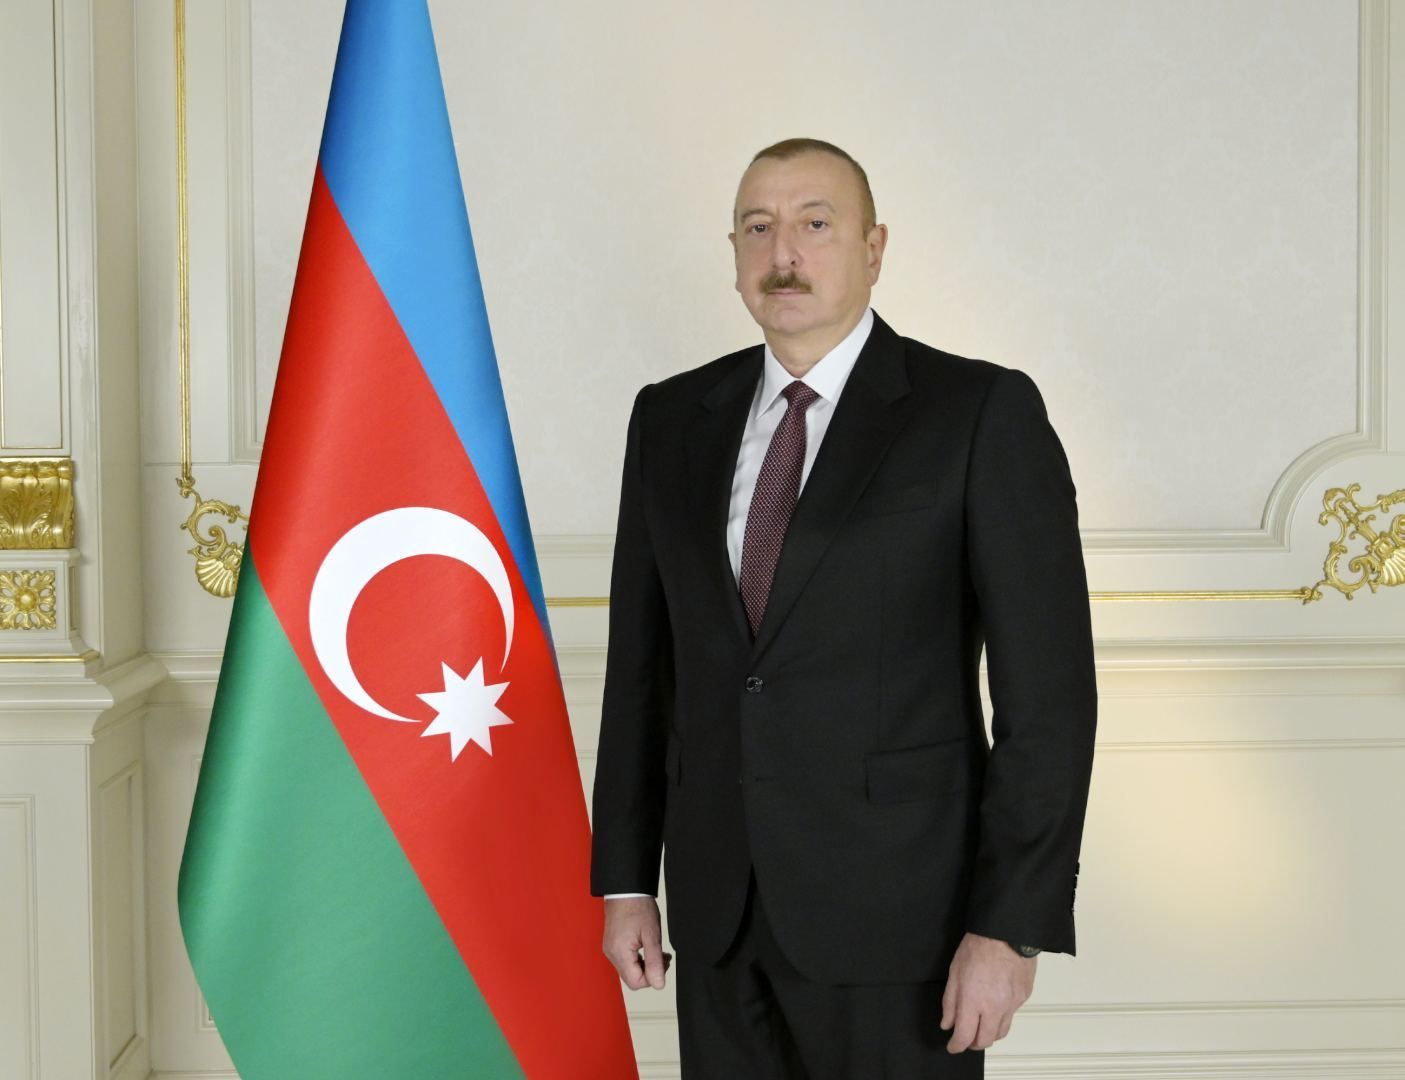 Azerbaijani President concludes his working visit to Hungary